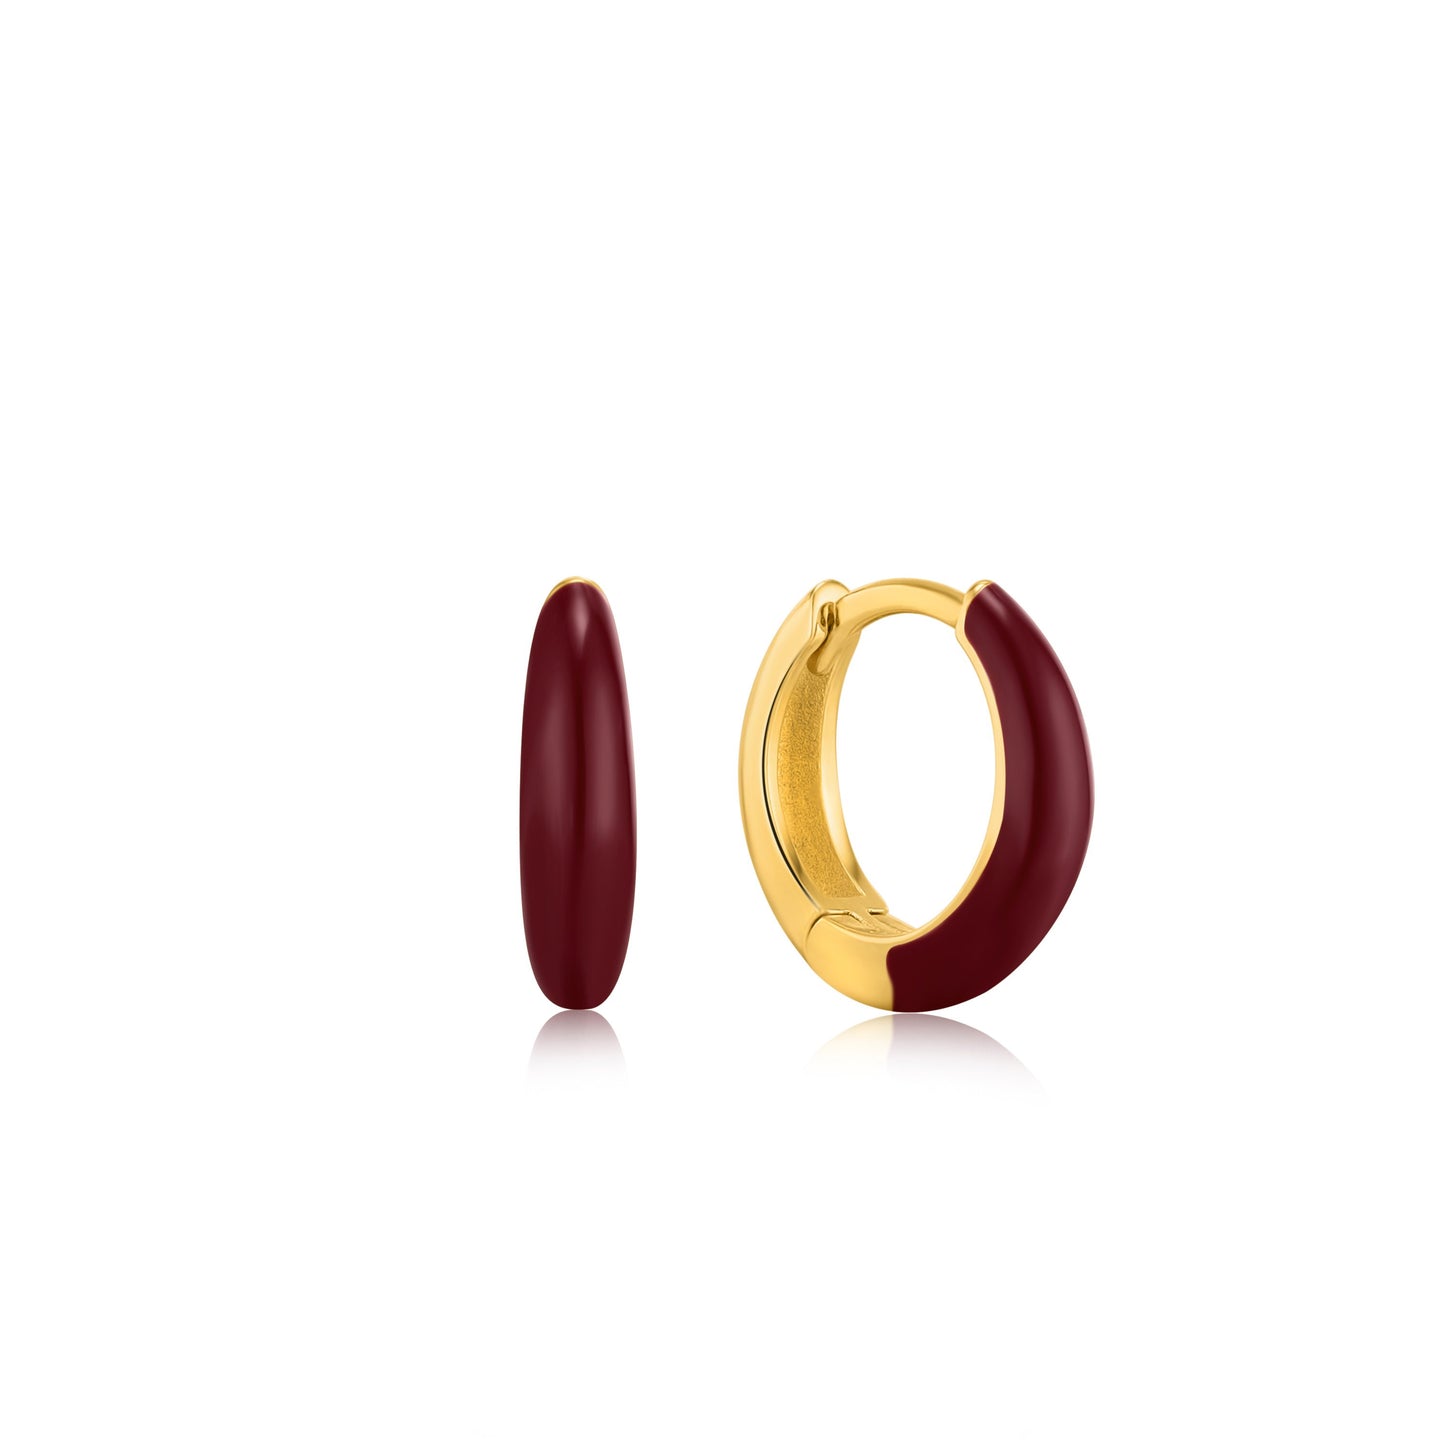 ANIA HAIE ANIA HAIE - Claret Red Enamel Gold sleep Huggie Hoop Earrings available at The Good Life Boutique